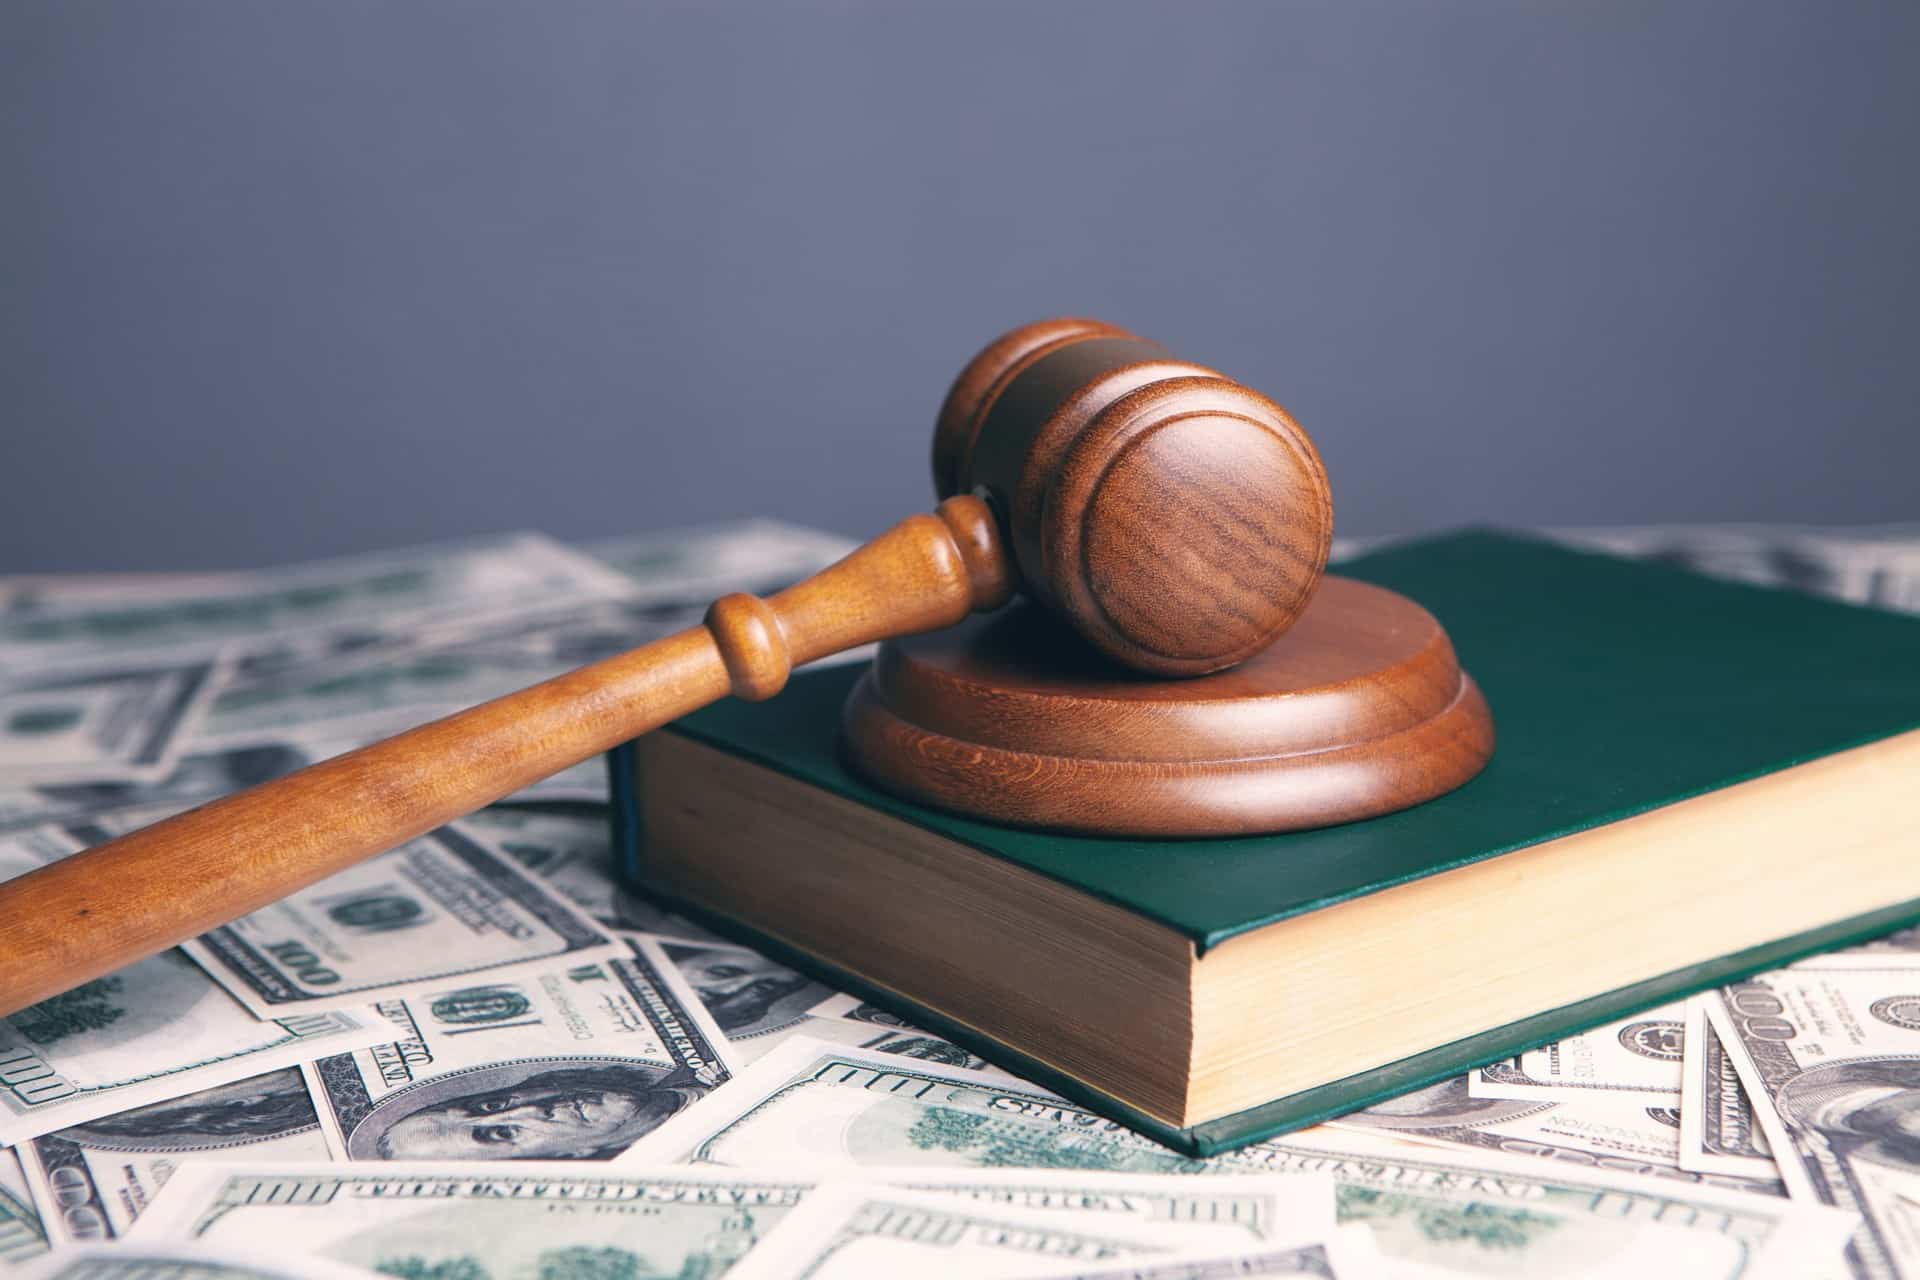 gavel over a pile of money - bail in Arizona